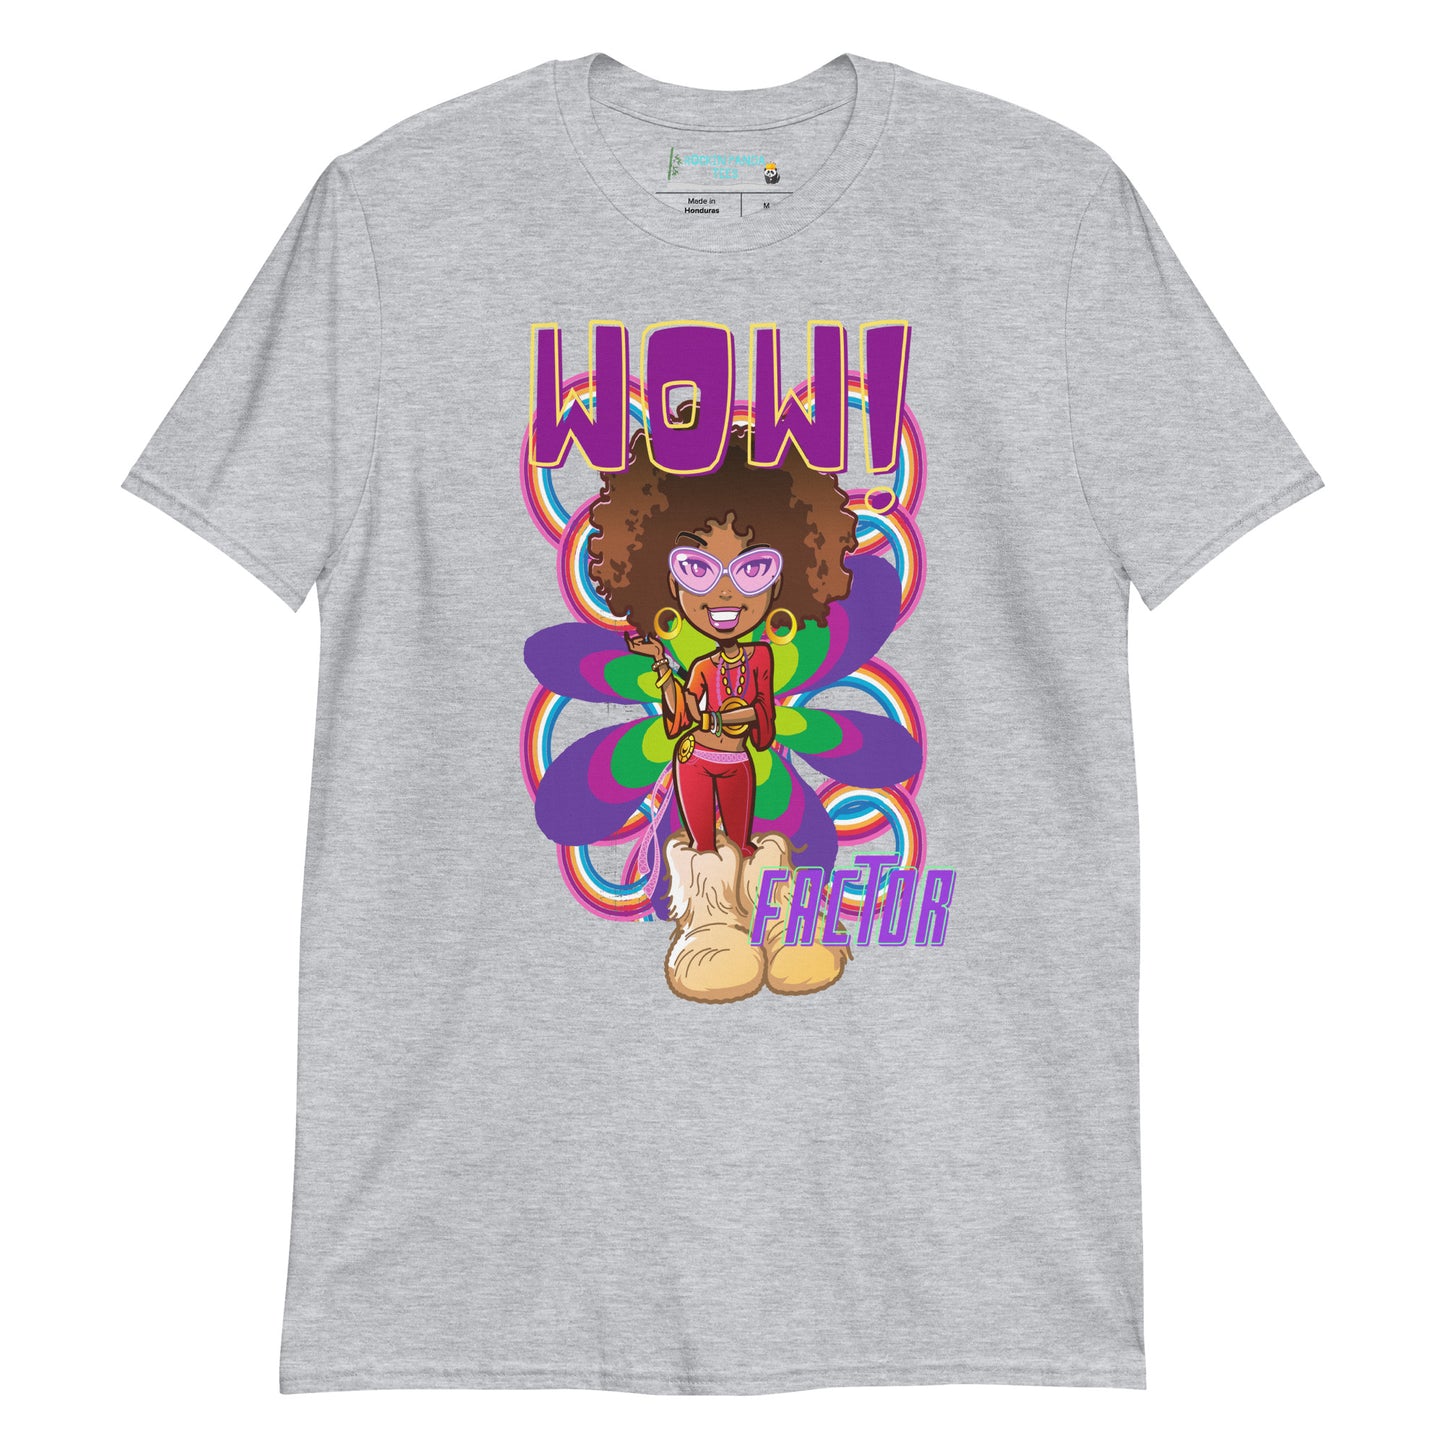 Wow Factor Groovy Black Girl in Boots Short-Sleeve Unisex Softstyle Tee